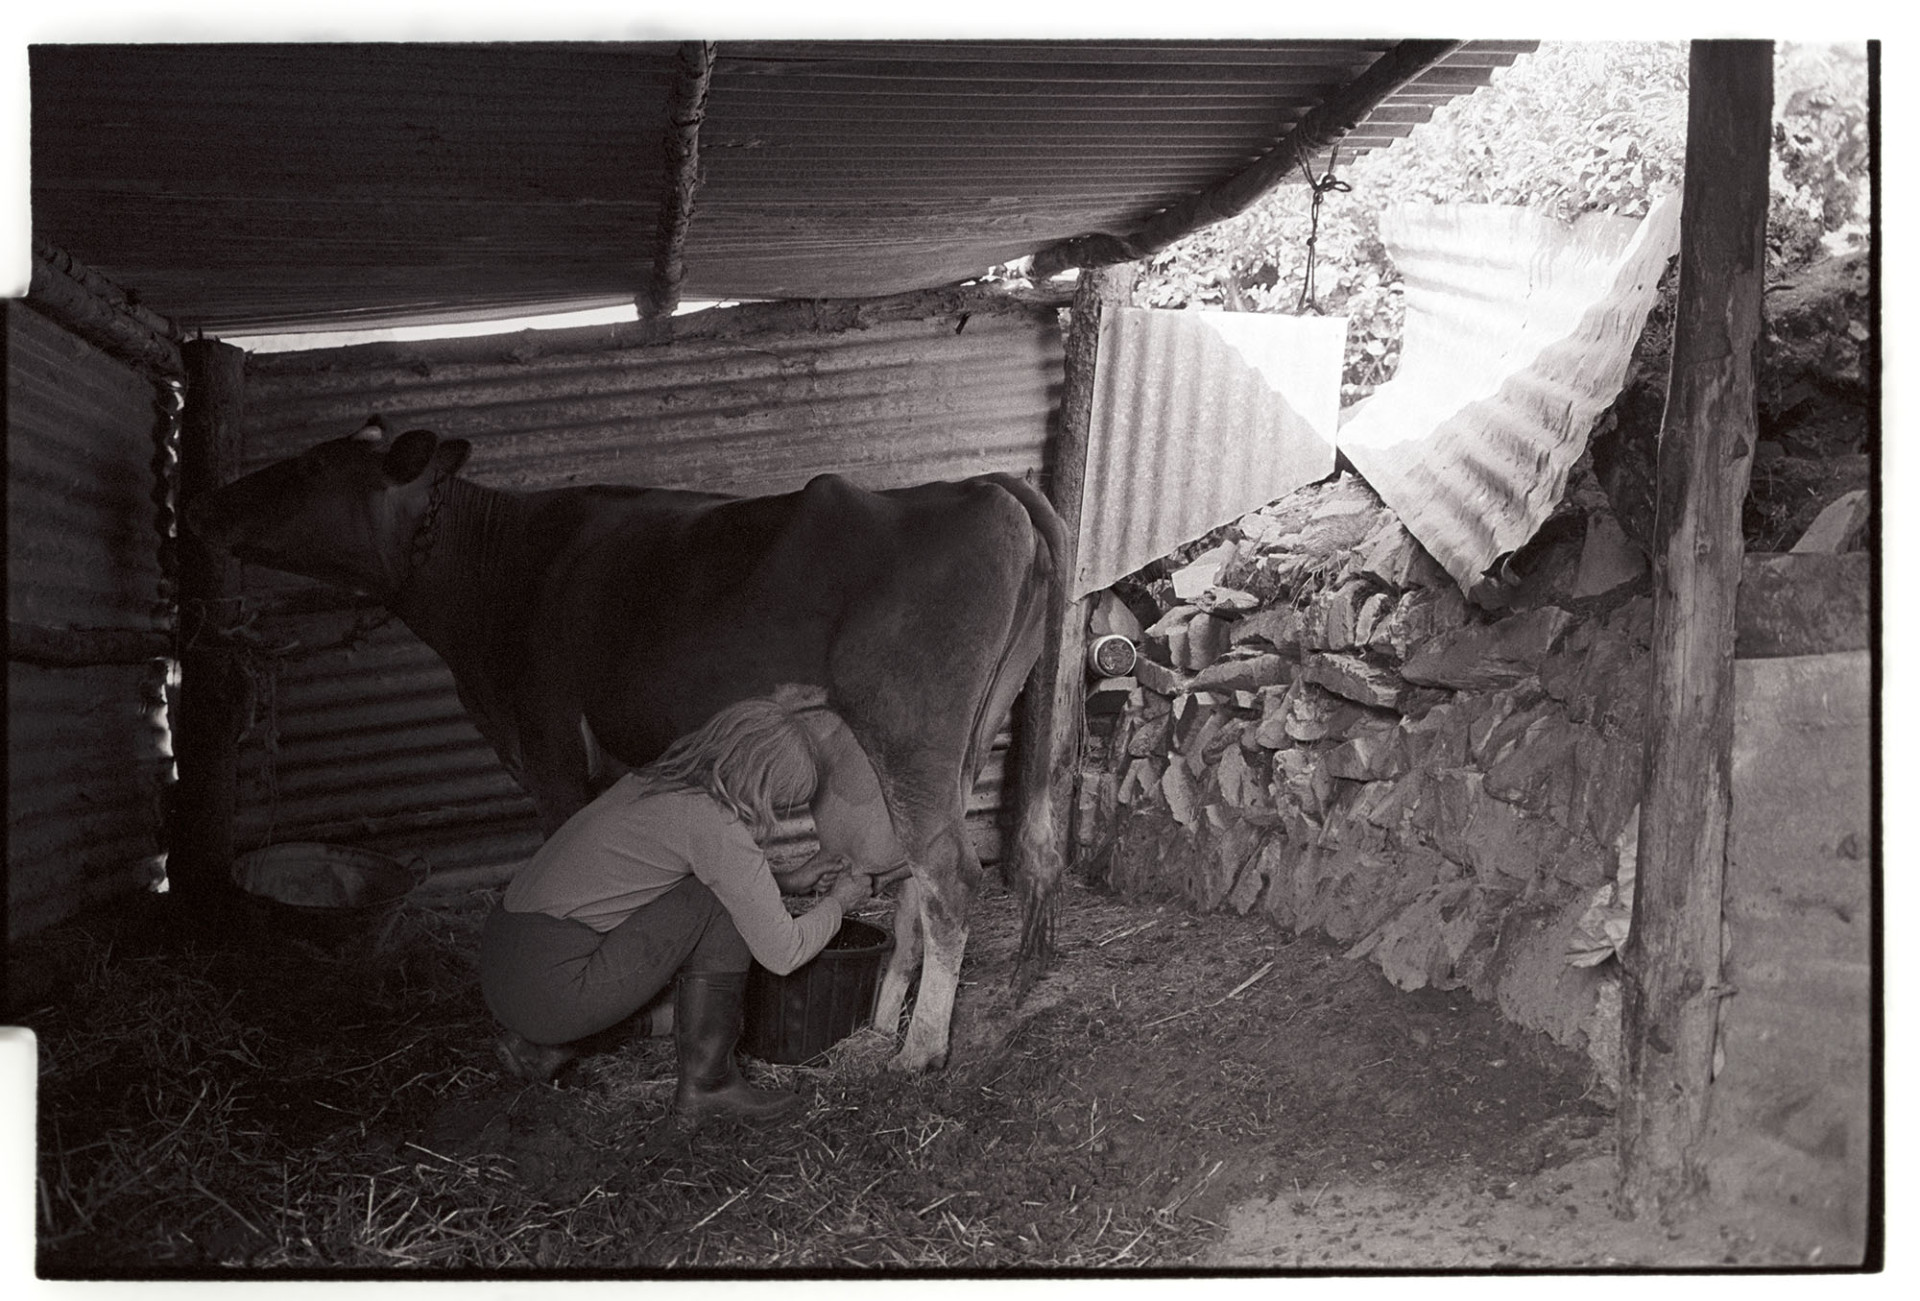 Woman milking cow in shed, by hand. 
[Jo Curzon milking a cow by hand in a small shed made of corrugated iron at Millhams, Dolton.]